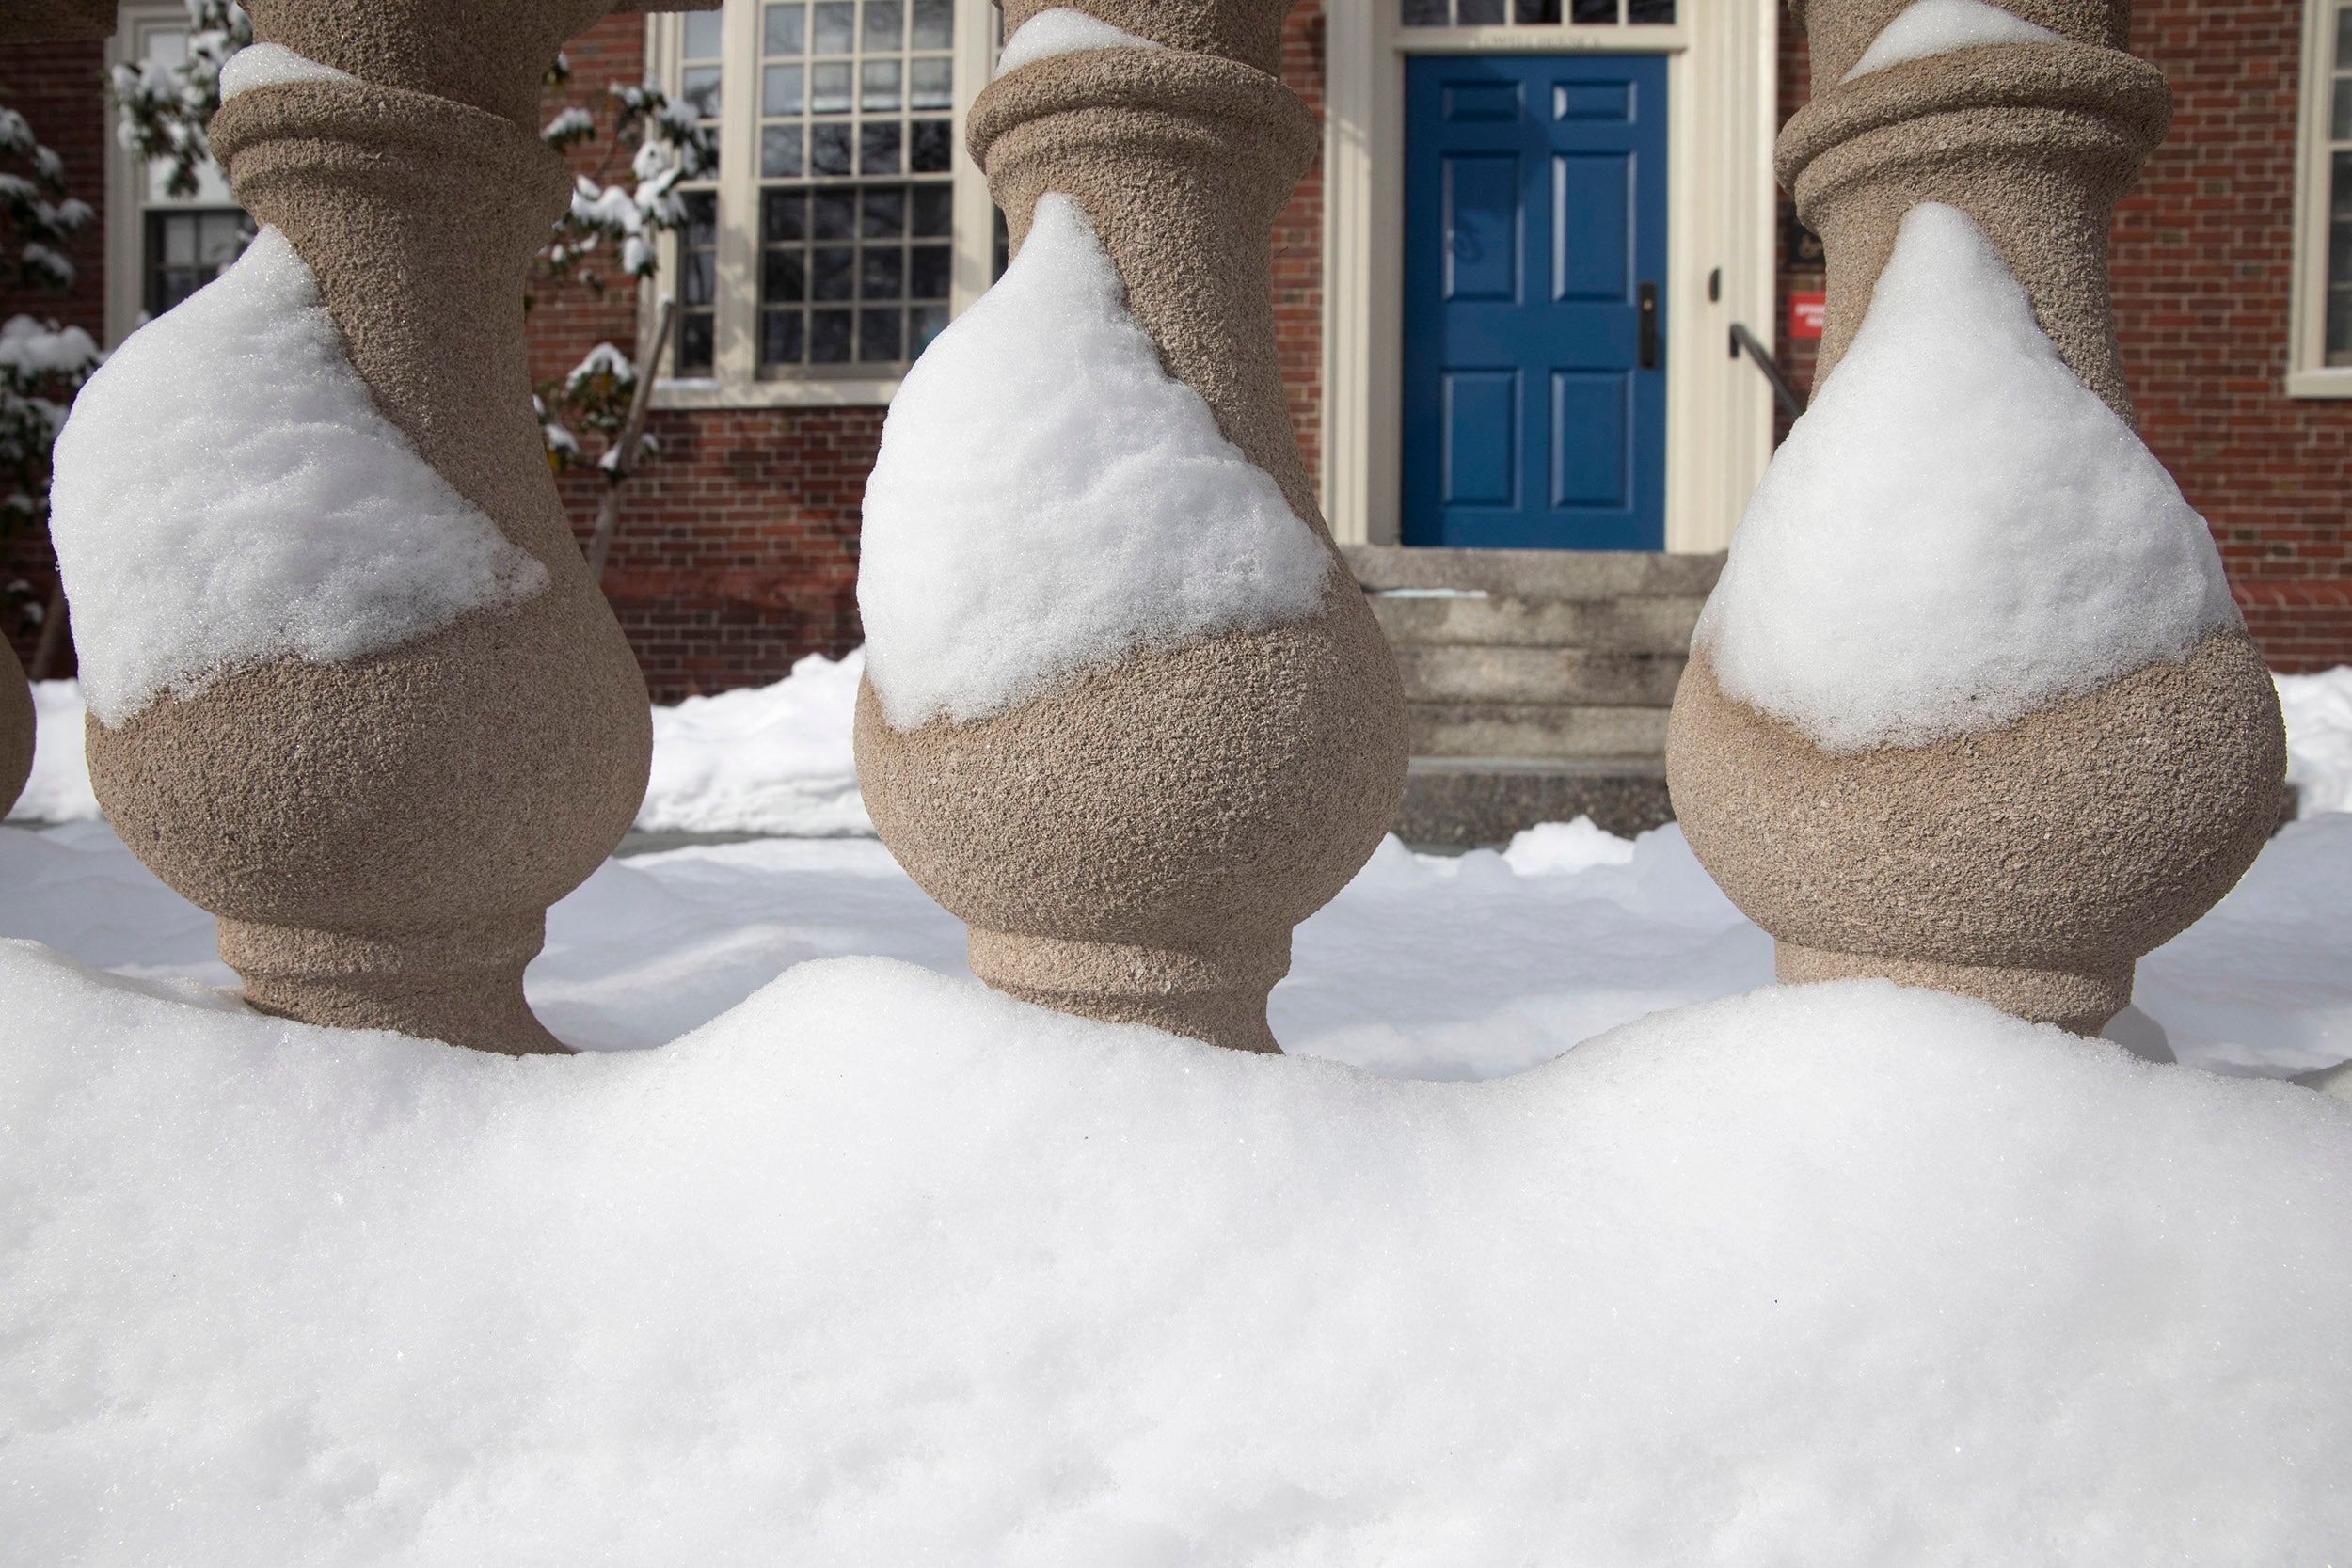 Lowell House columns remain frosted with snow after a storm.